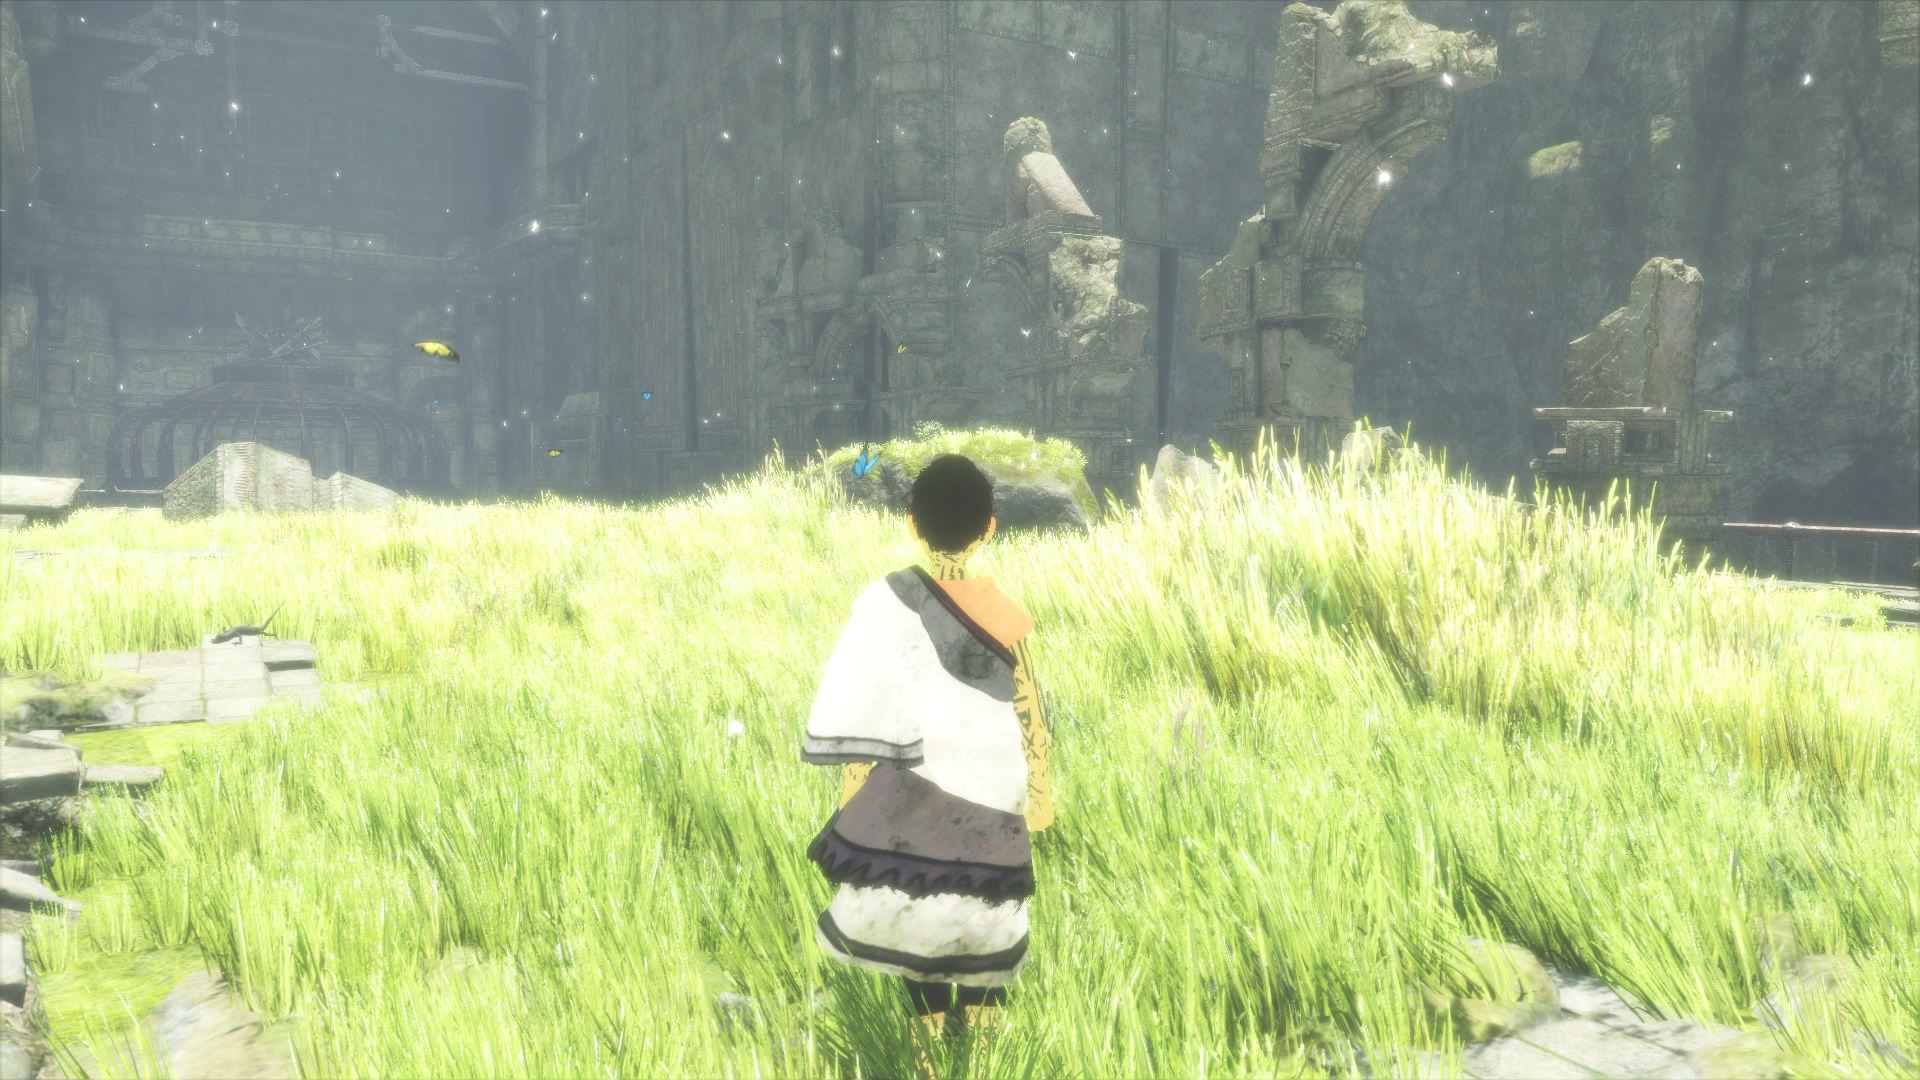 The Last Guardian' Review: You Were There